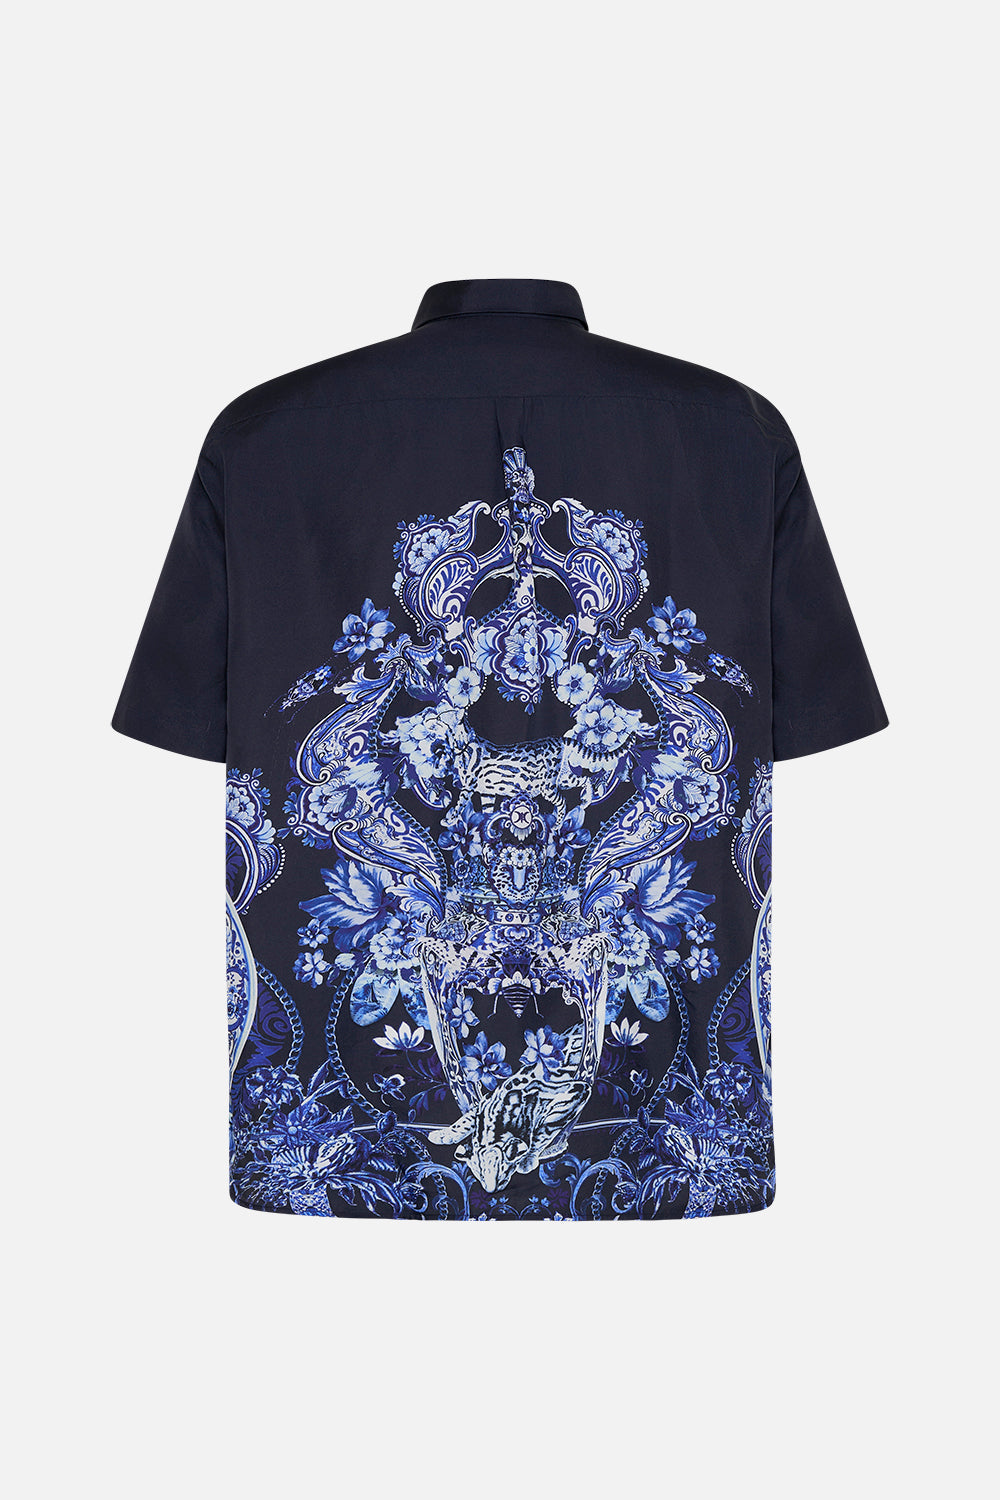 Back product view of  Hotel Franks by CAMILLA mens silk shirt in delft Dynasty print